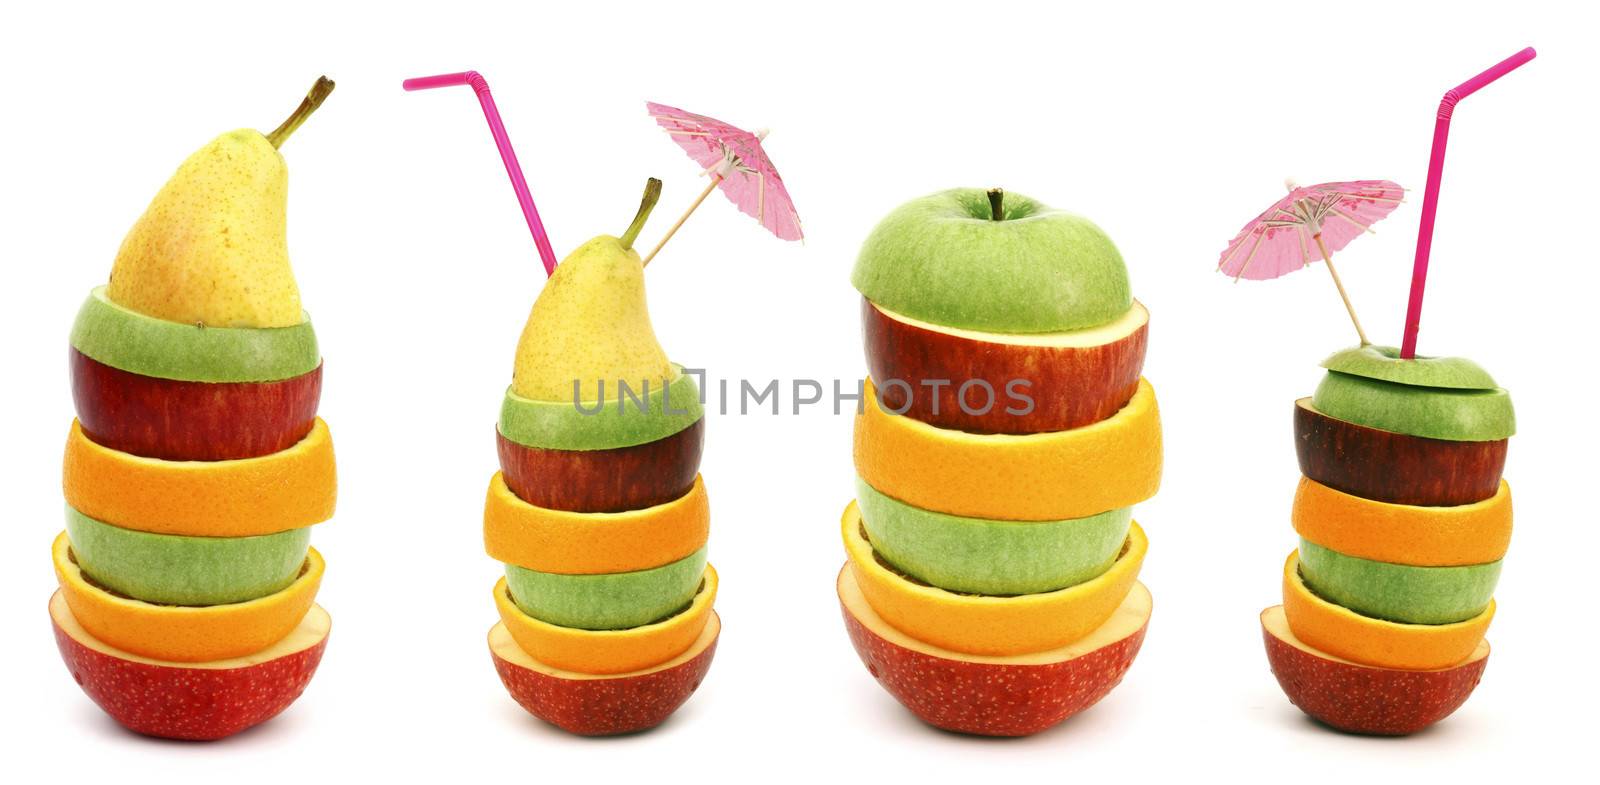 Stack of different fruit slices on white background